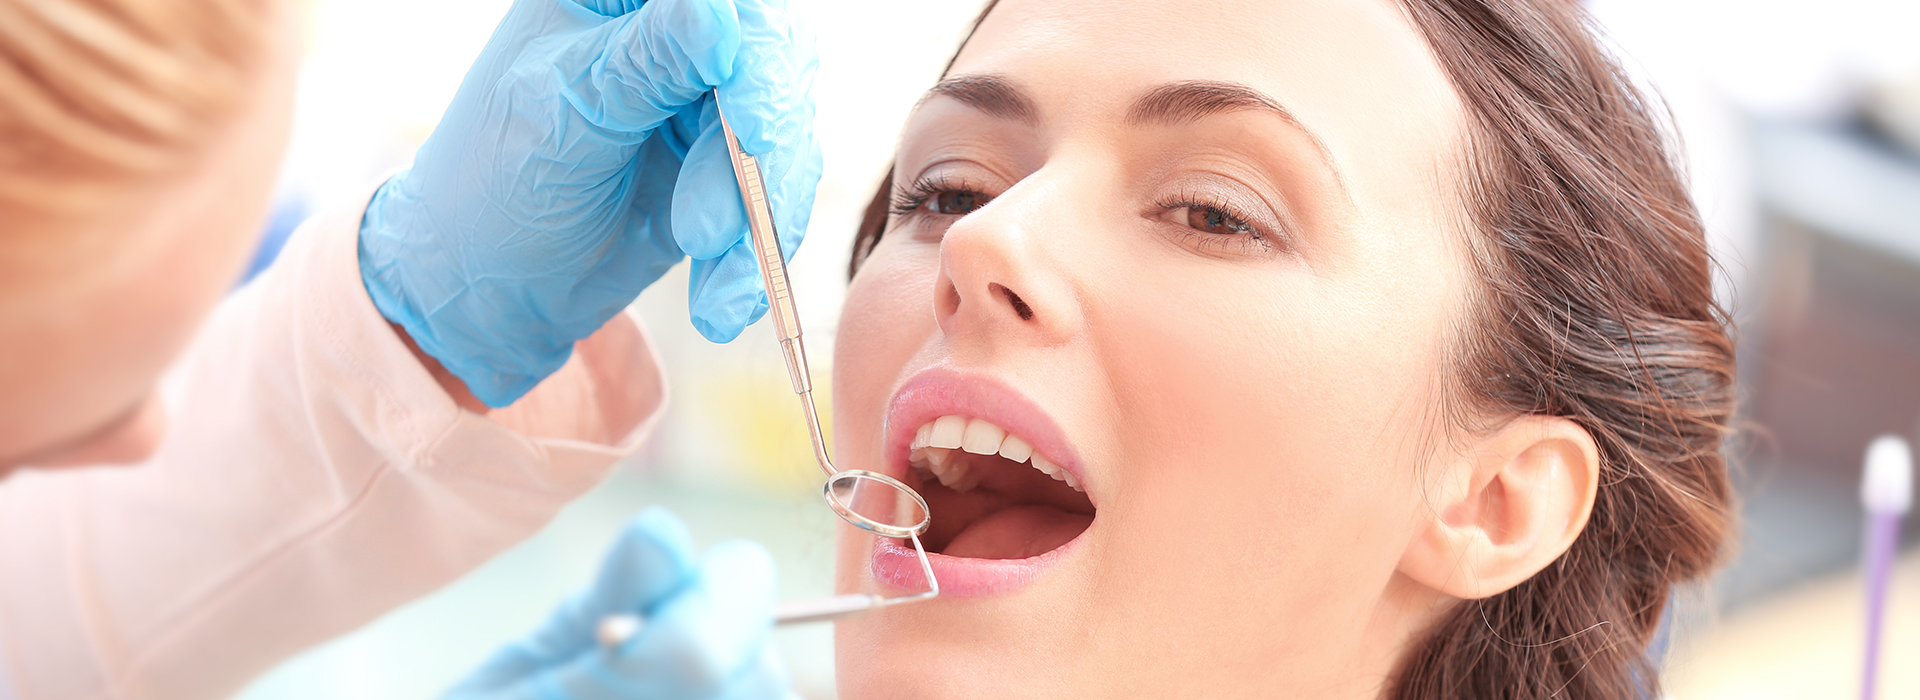 Steven R. Feigelson, DDS | Oral Exams, Same Day Crowns and Teeth Whitening